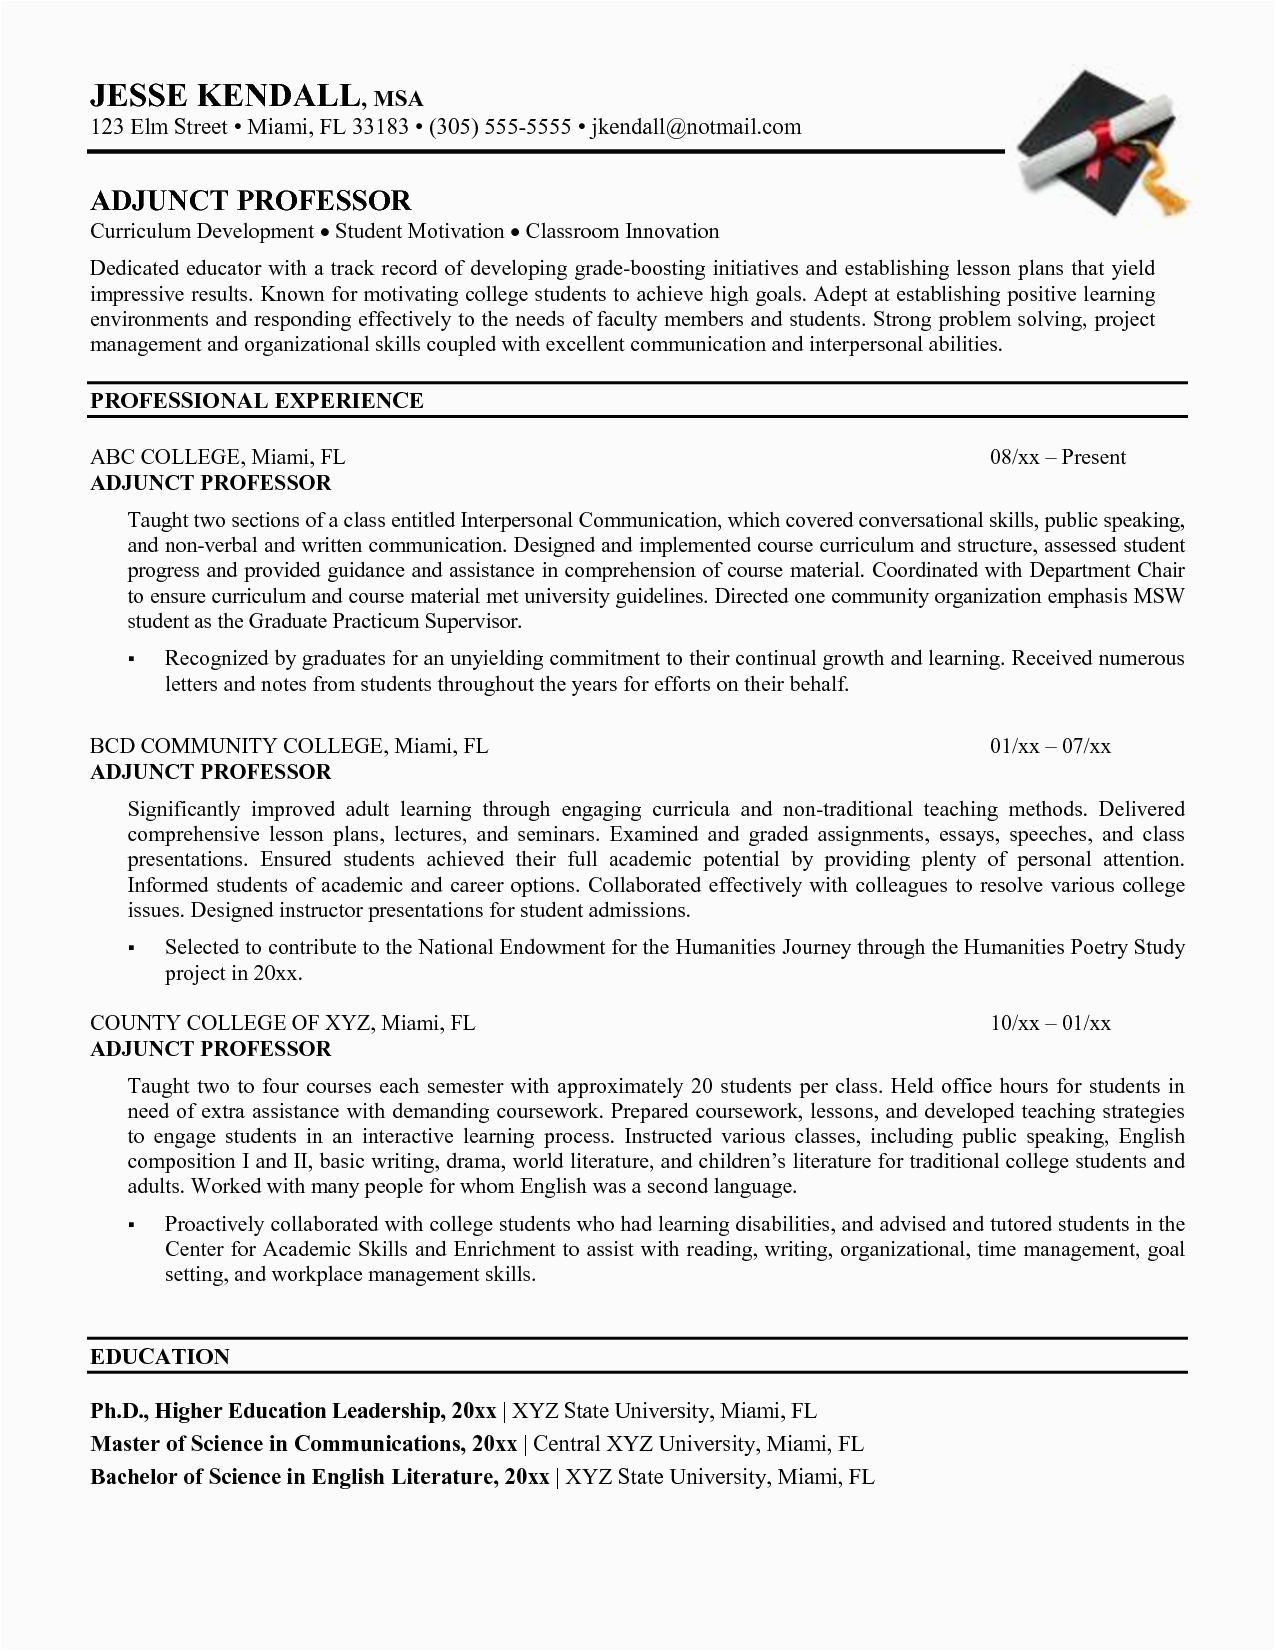 Sample Resume for College Faculty Position Sample Resume for Faculty Position Engineering Adjunct